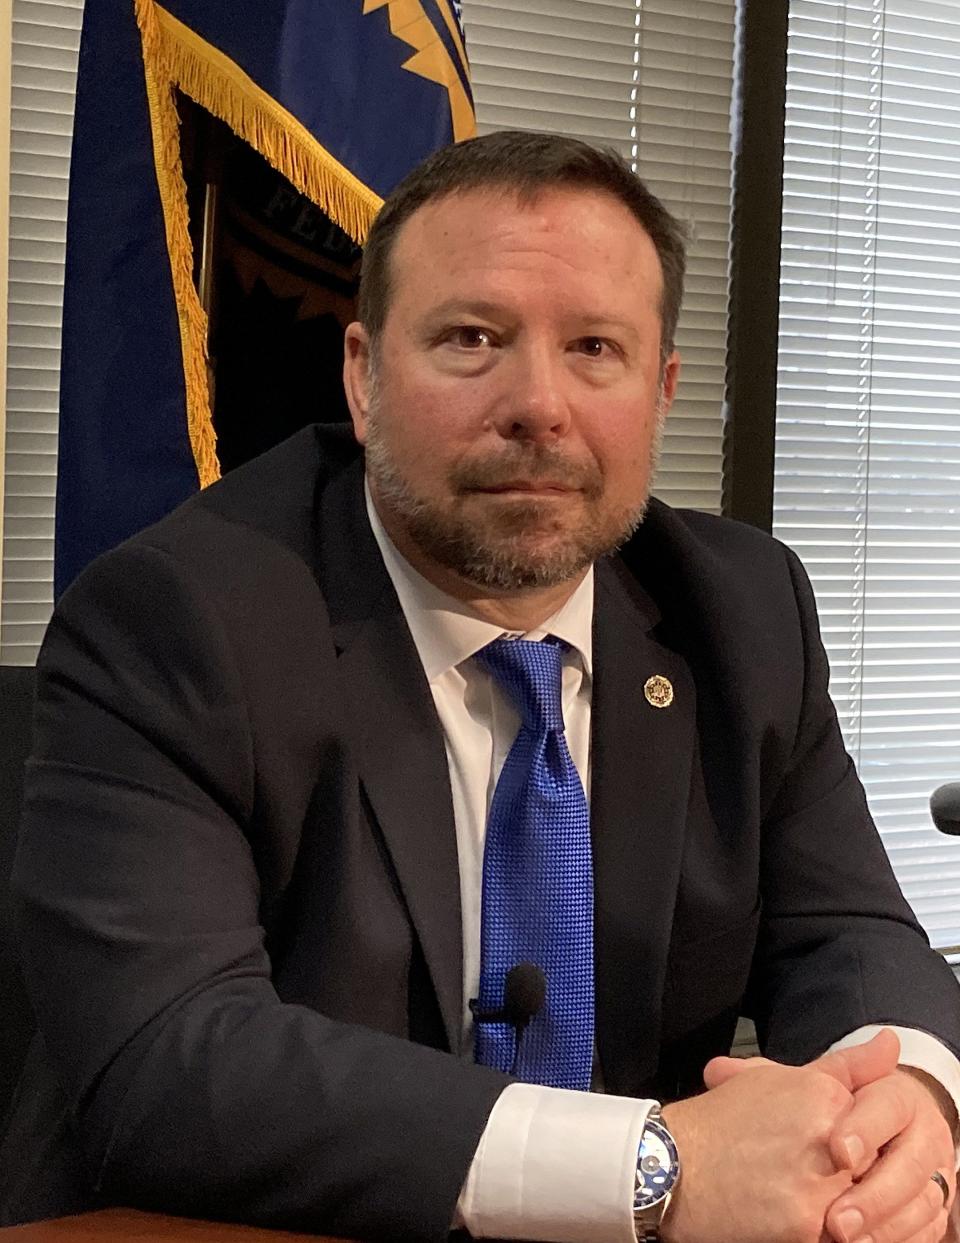 Jason T. Crouse is the new supervisory special agent for the FBI office in Erie, which is under the FBI office in Pittsburgh. The FBI made his appointment public on Oct. 27, when this photo was taken at the FBI office on State Street in Erie